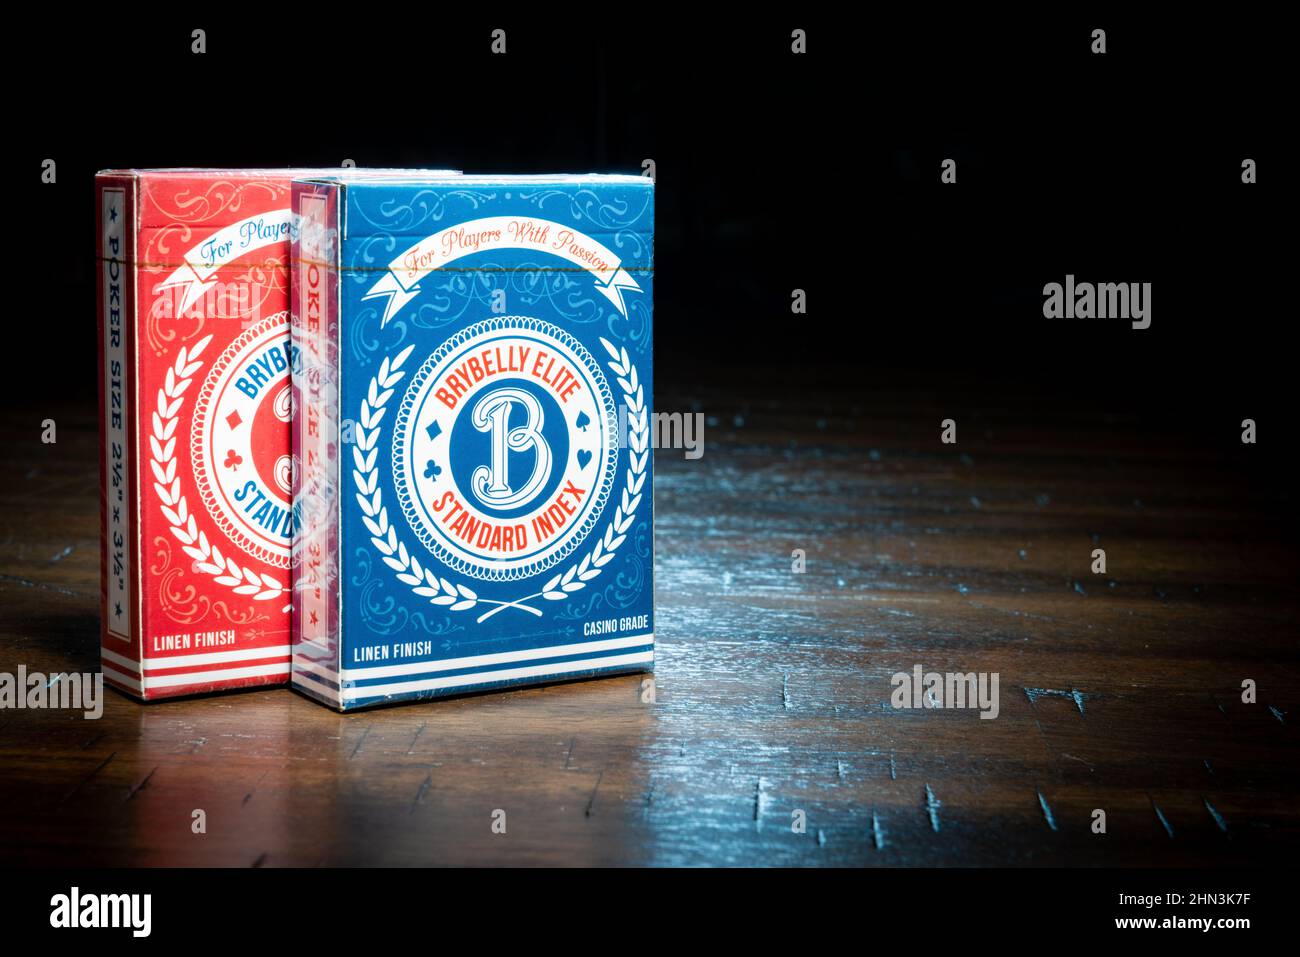 SAINT CLOUD, MINNESOTA - 11 FEBRUARY, 2022: Two packs of Brybelly Elite playing cards sit on a wooden table. Stock Photo